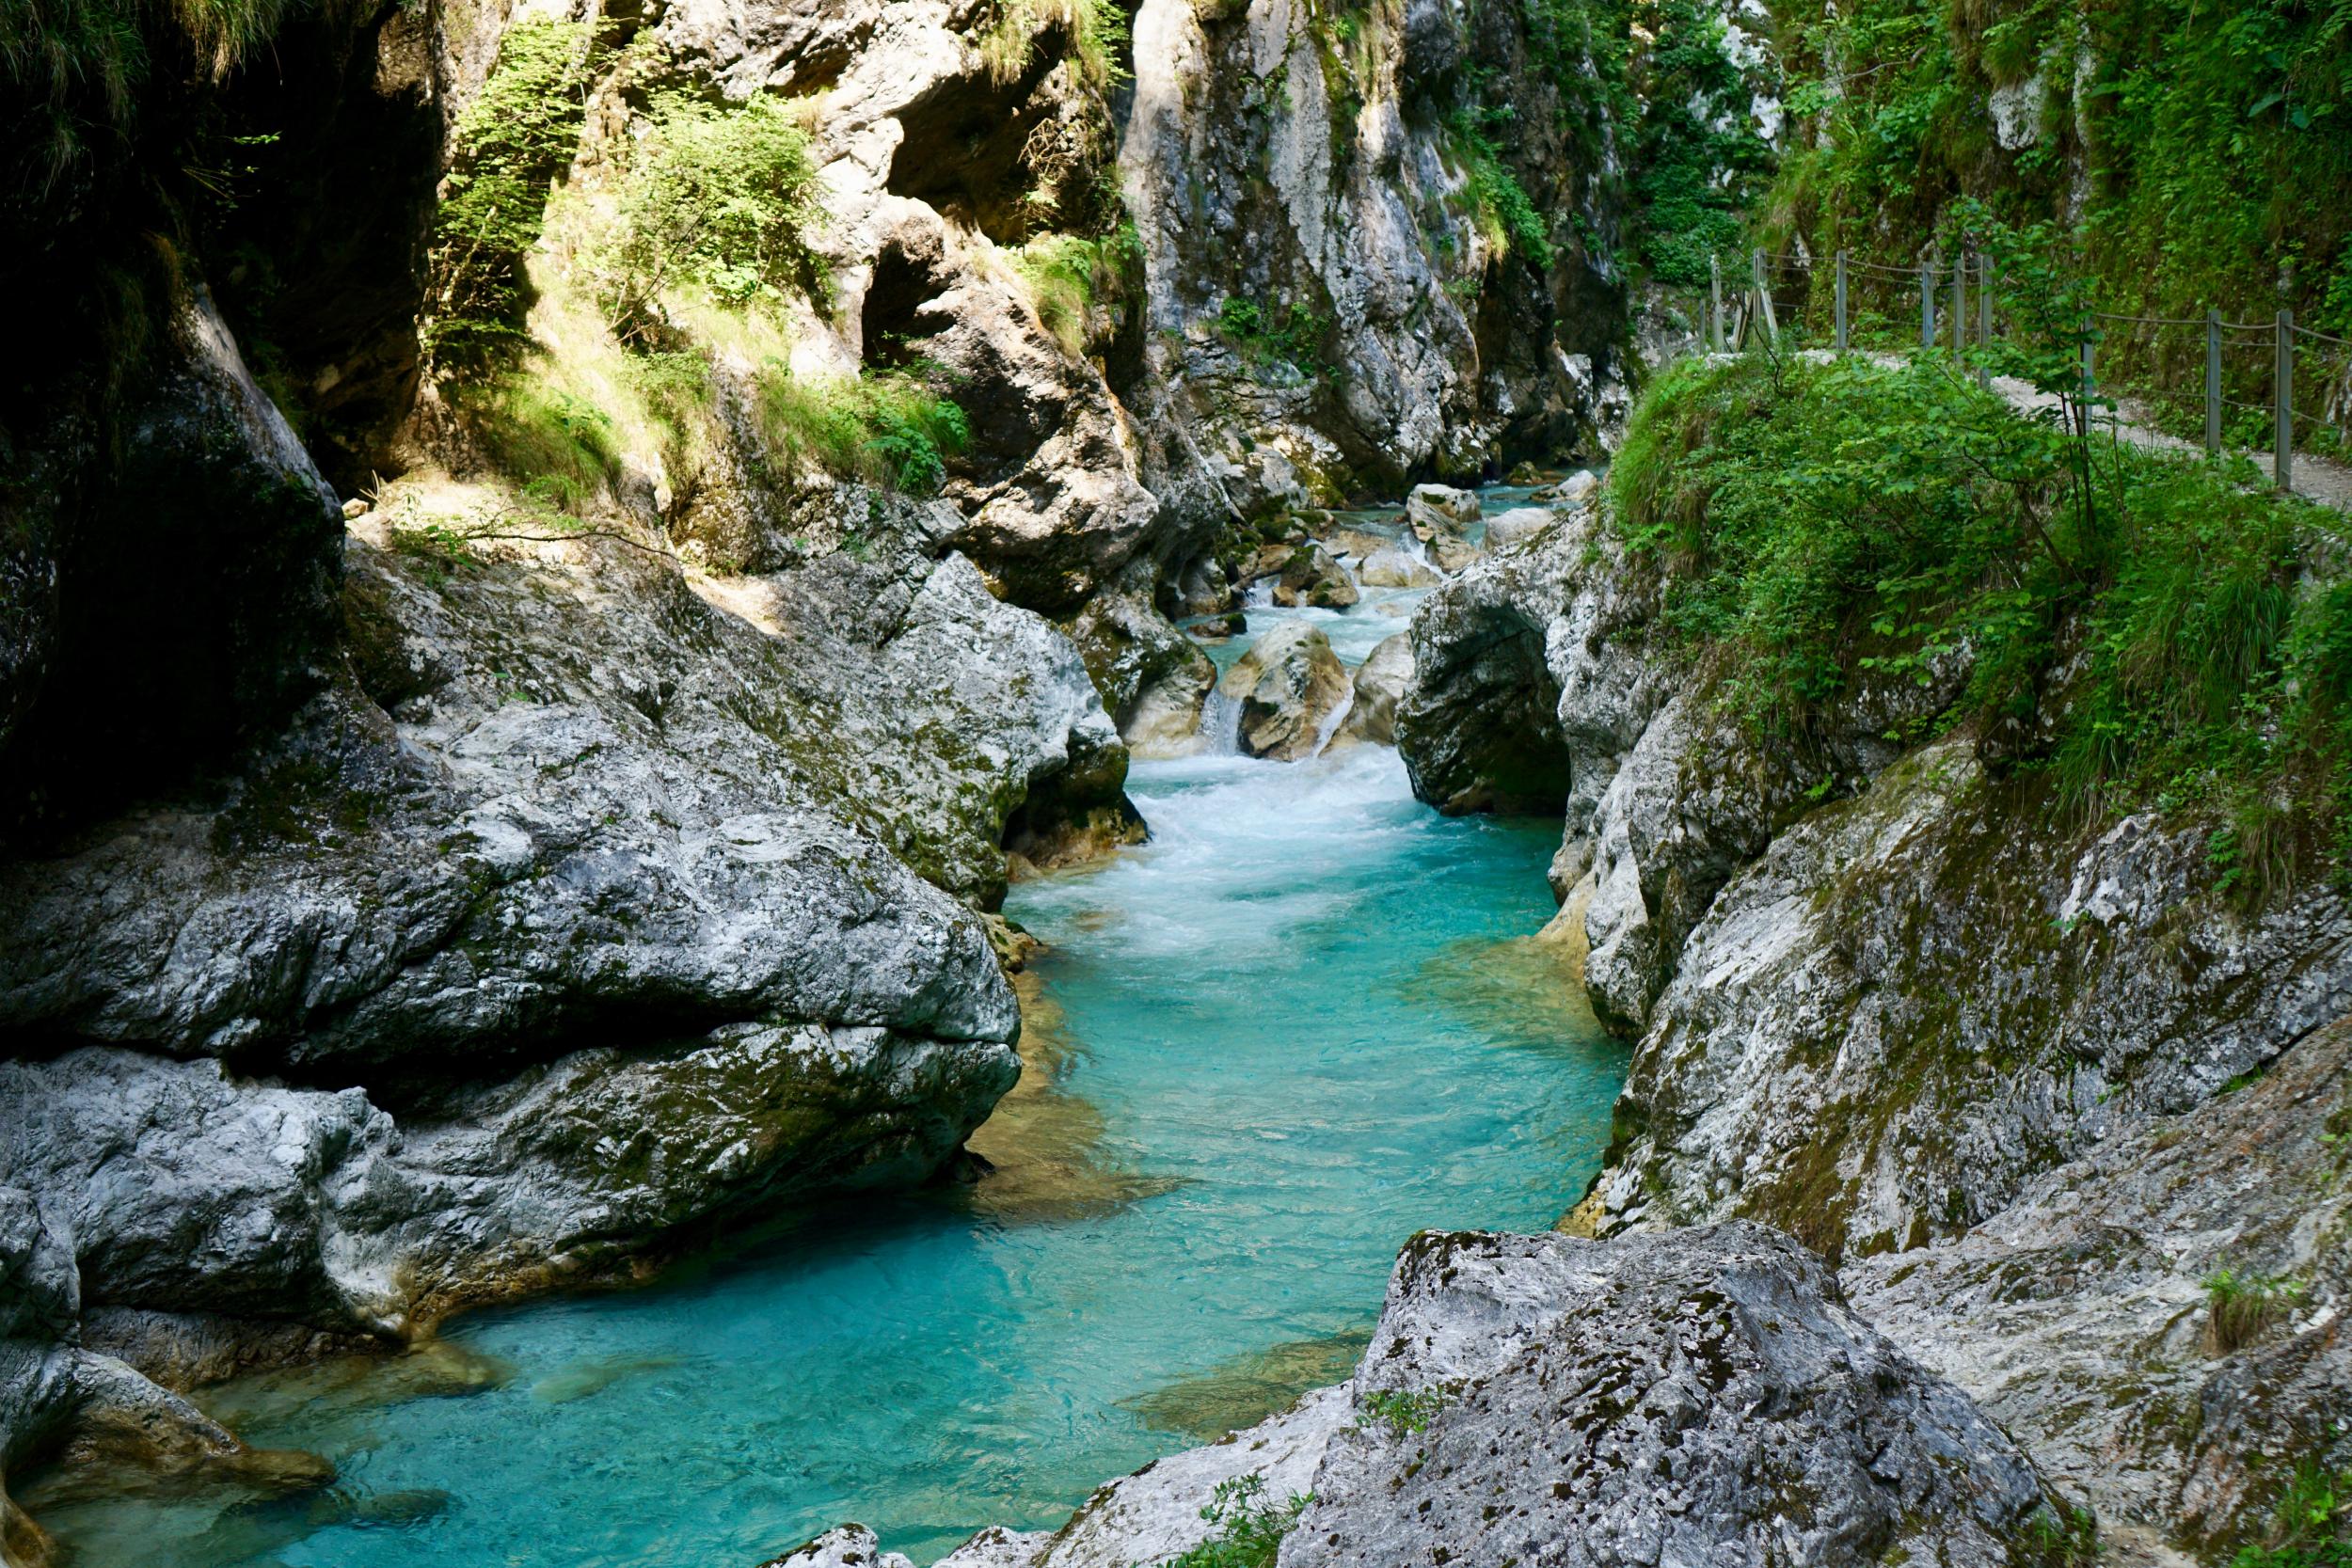 The turquoise Soca river inside the Great Soca Gorge